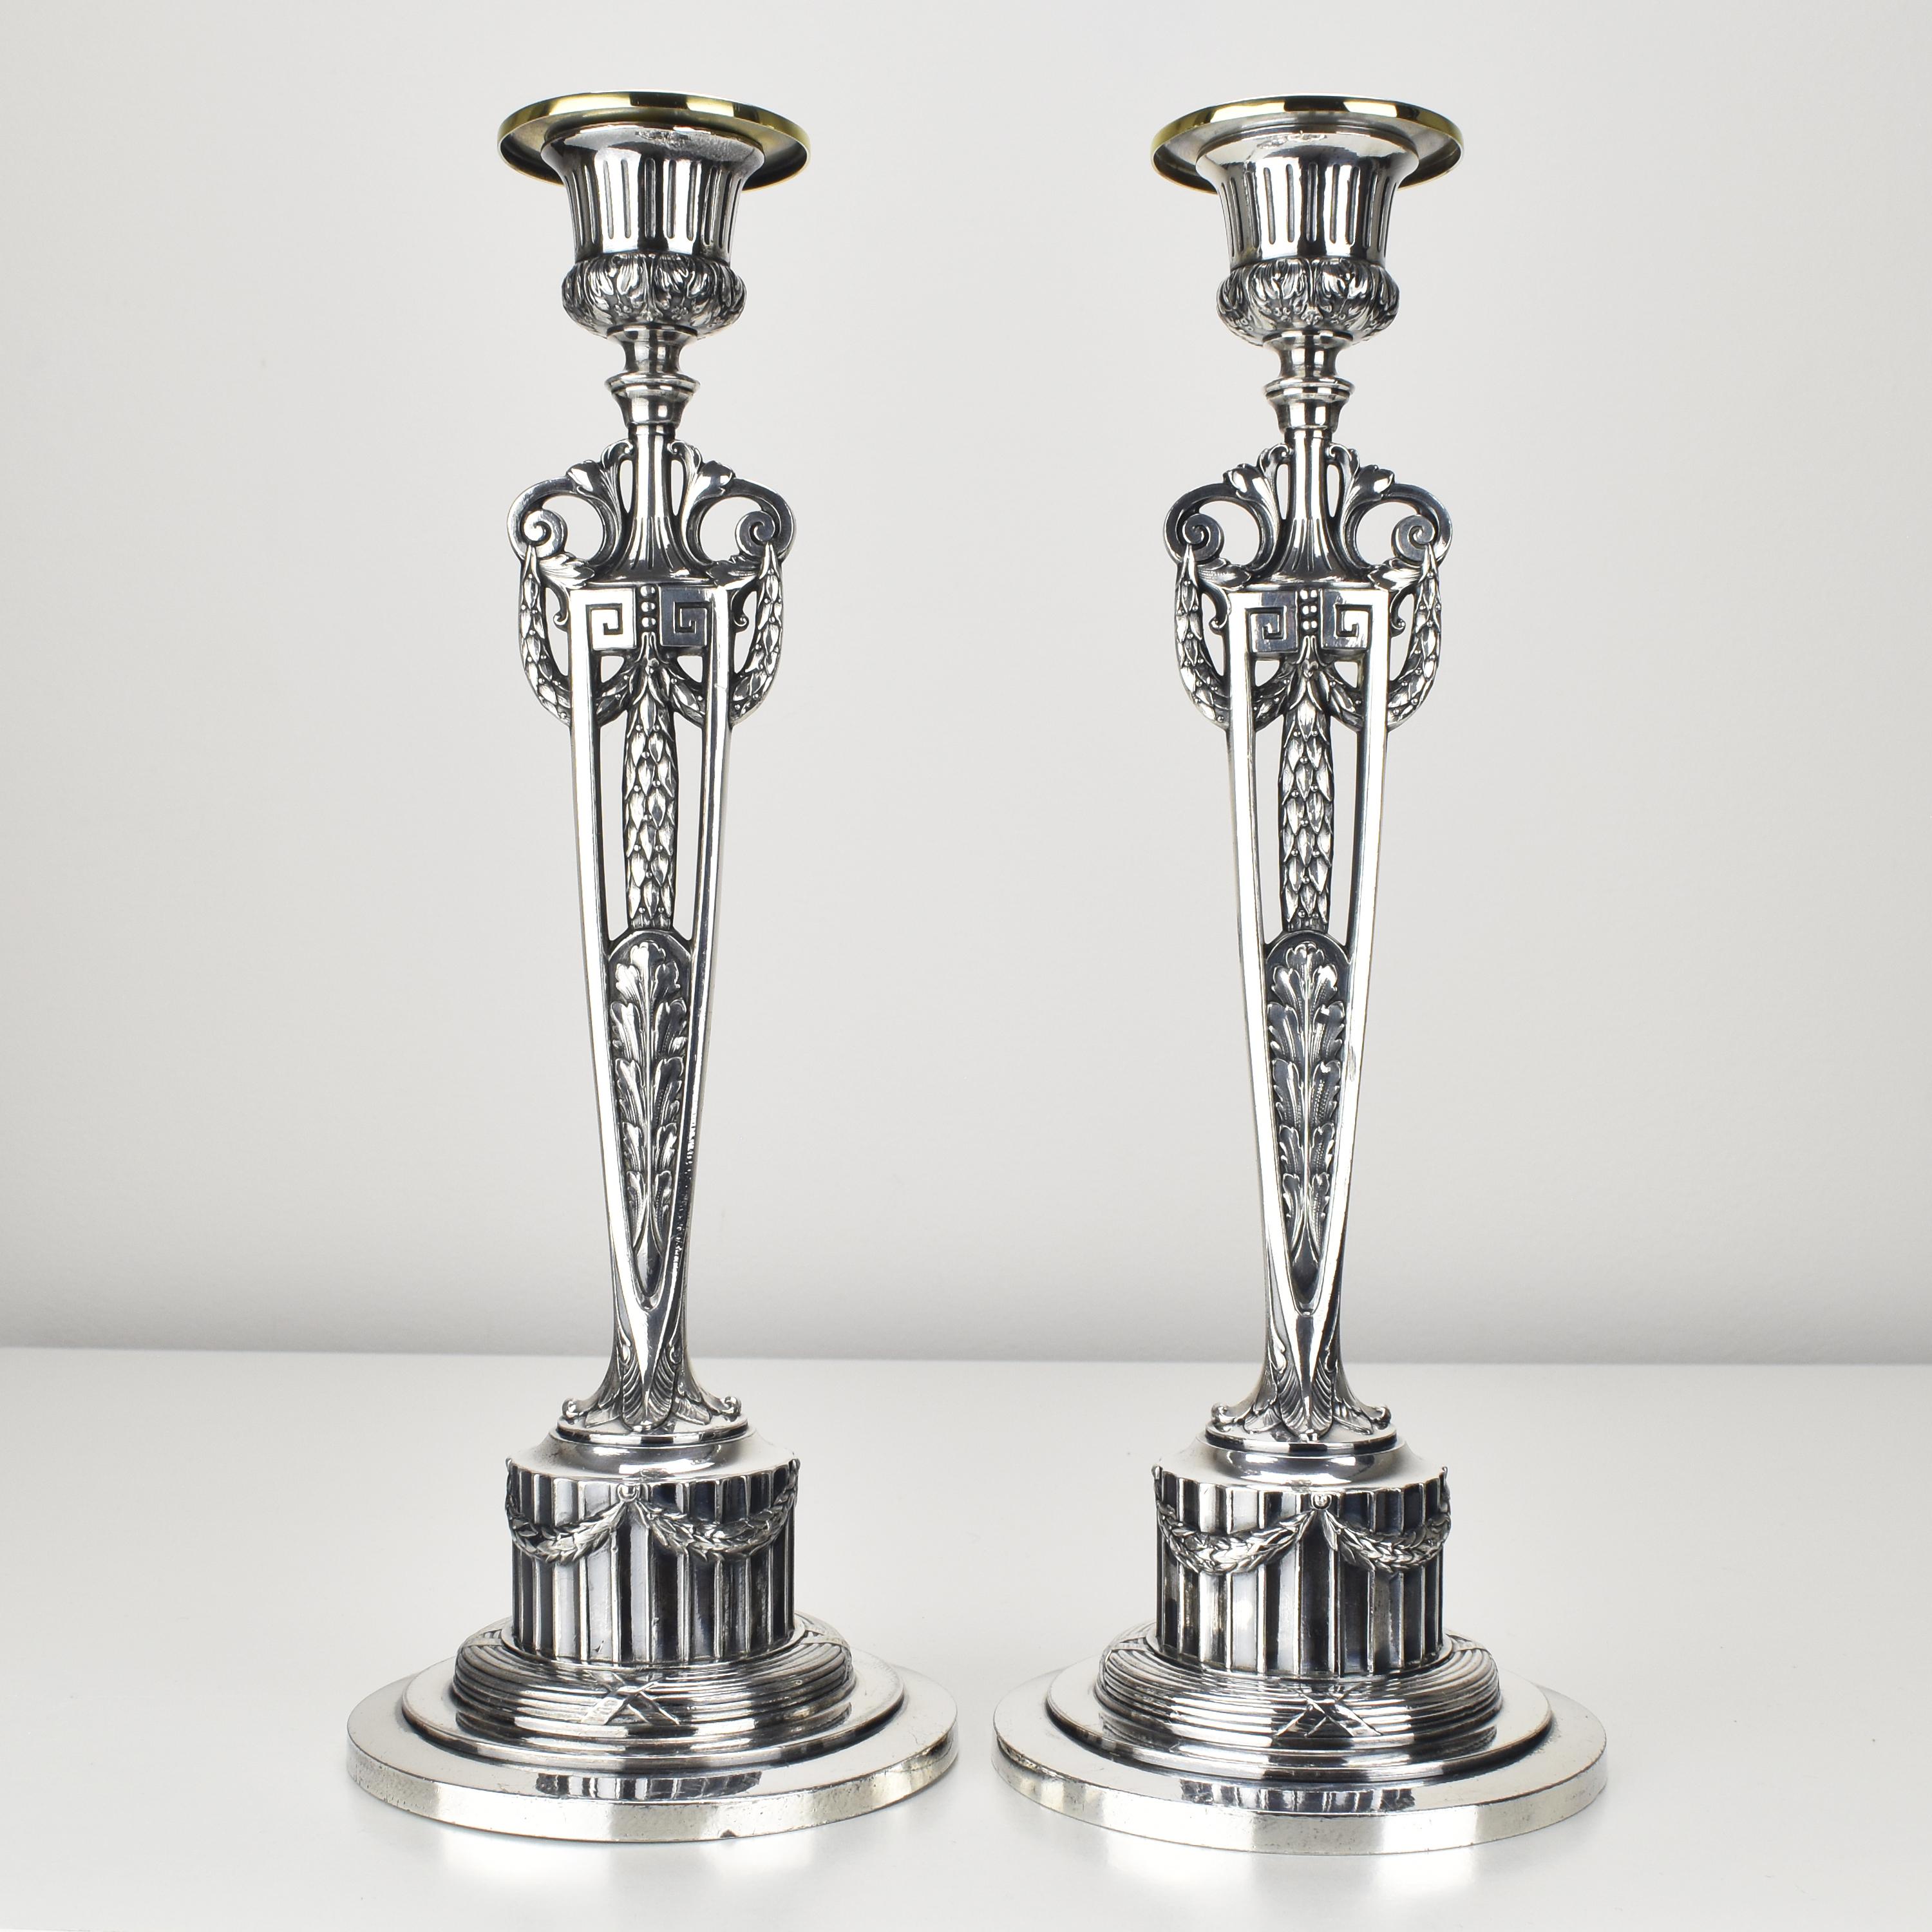 Beautiful pair of antique candlesticks by WMF are stunning examples of silverplated pewter craftsmanship, made during the Art Nouveau period around 1900. They are part of the 